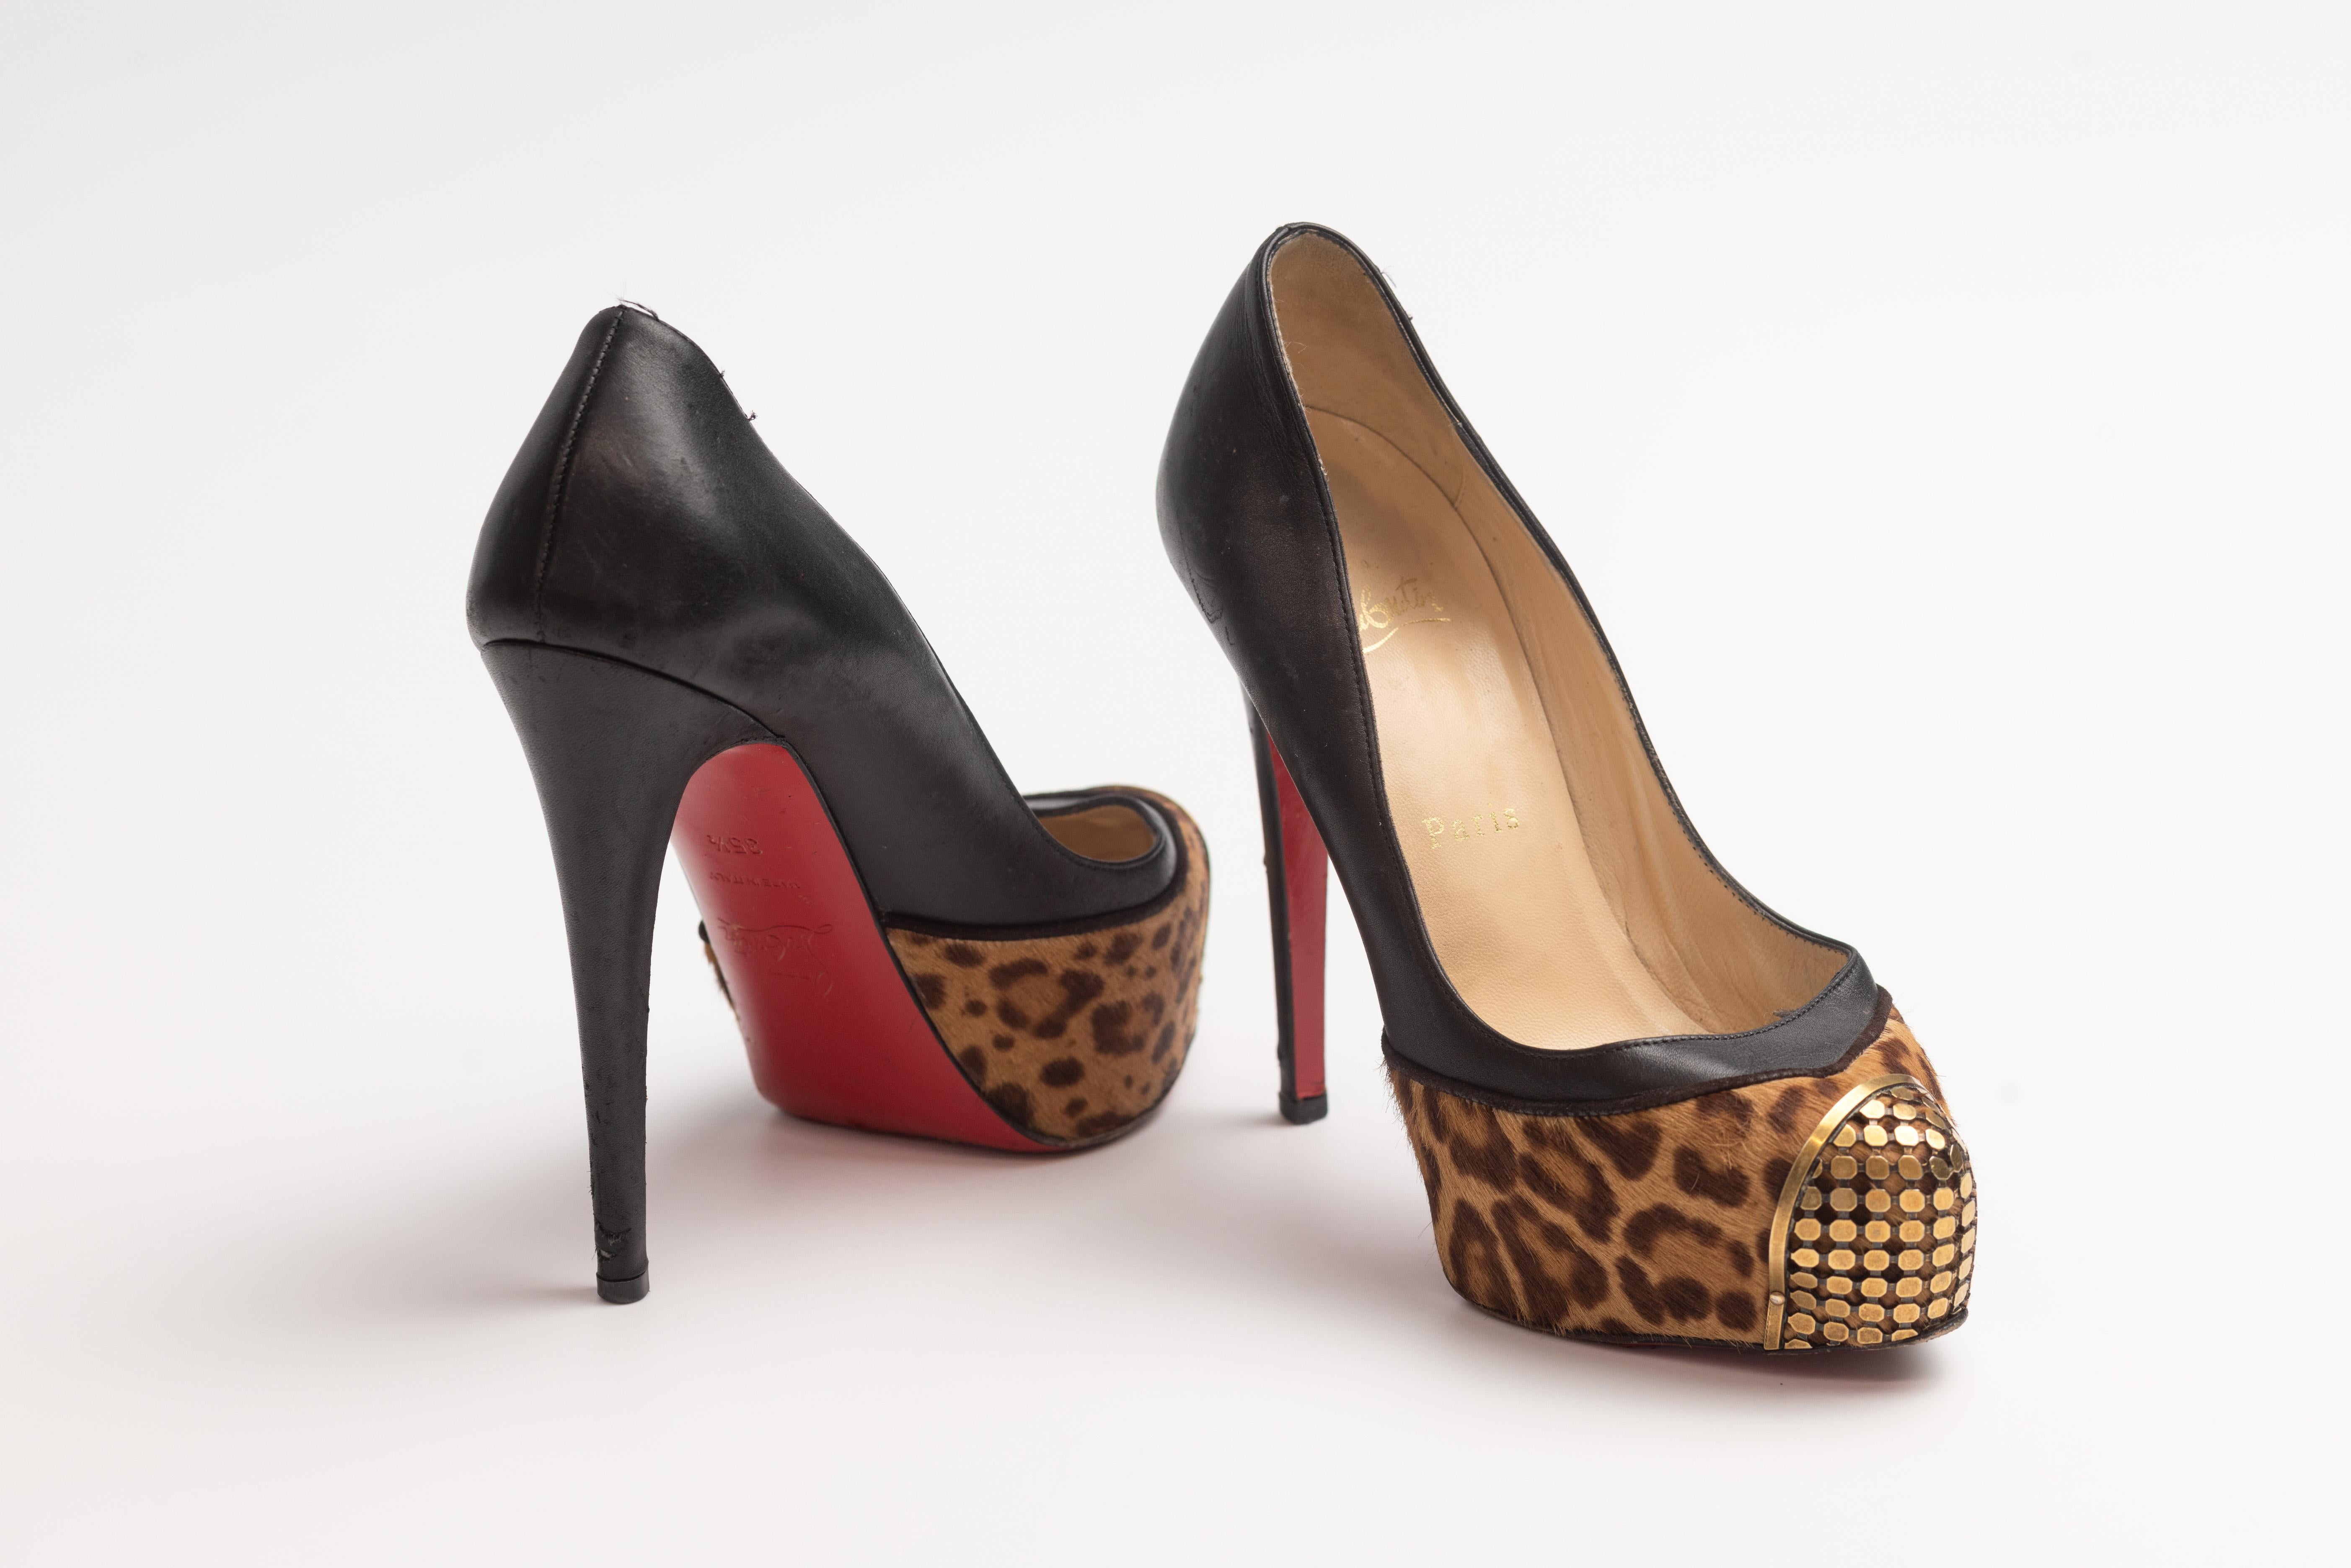 CHRISTIAN LOUBOUTIN LEOPARD PRINT PONY HAIR MAGGIE PUMPS (EU 35.5)

Color: Black with ebony cheat print 
Material: Leather with pony hair and a metal plate at toe.
Size: 35.5 EU / 4.5 US
Heel Height: 100 mm / 4”
Platform Height: 25 mm / 1” 
Comes